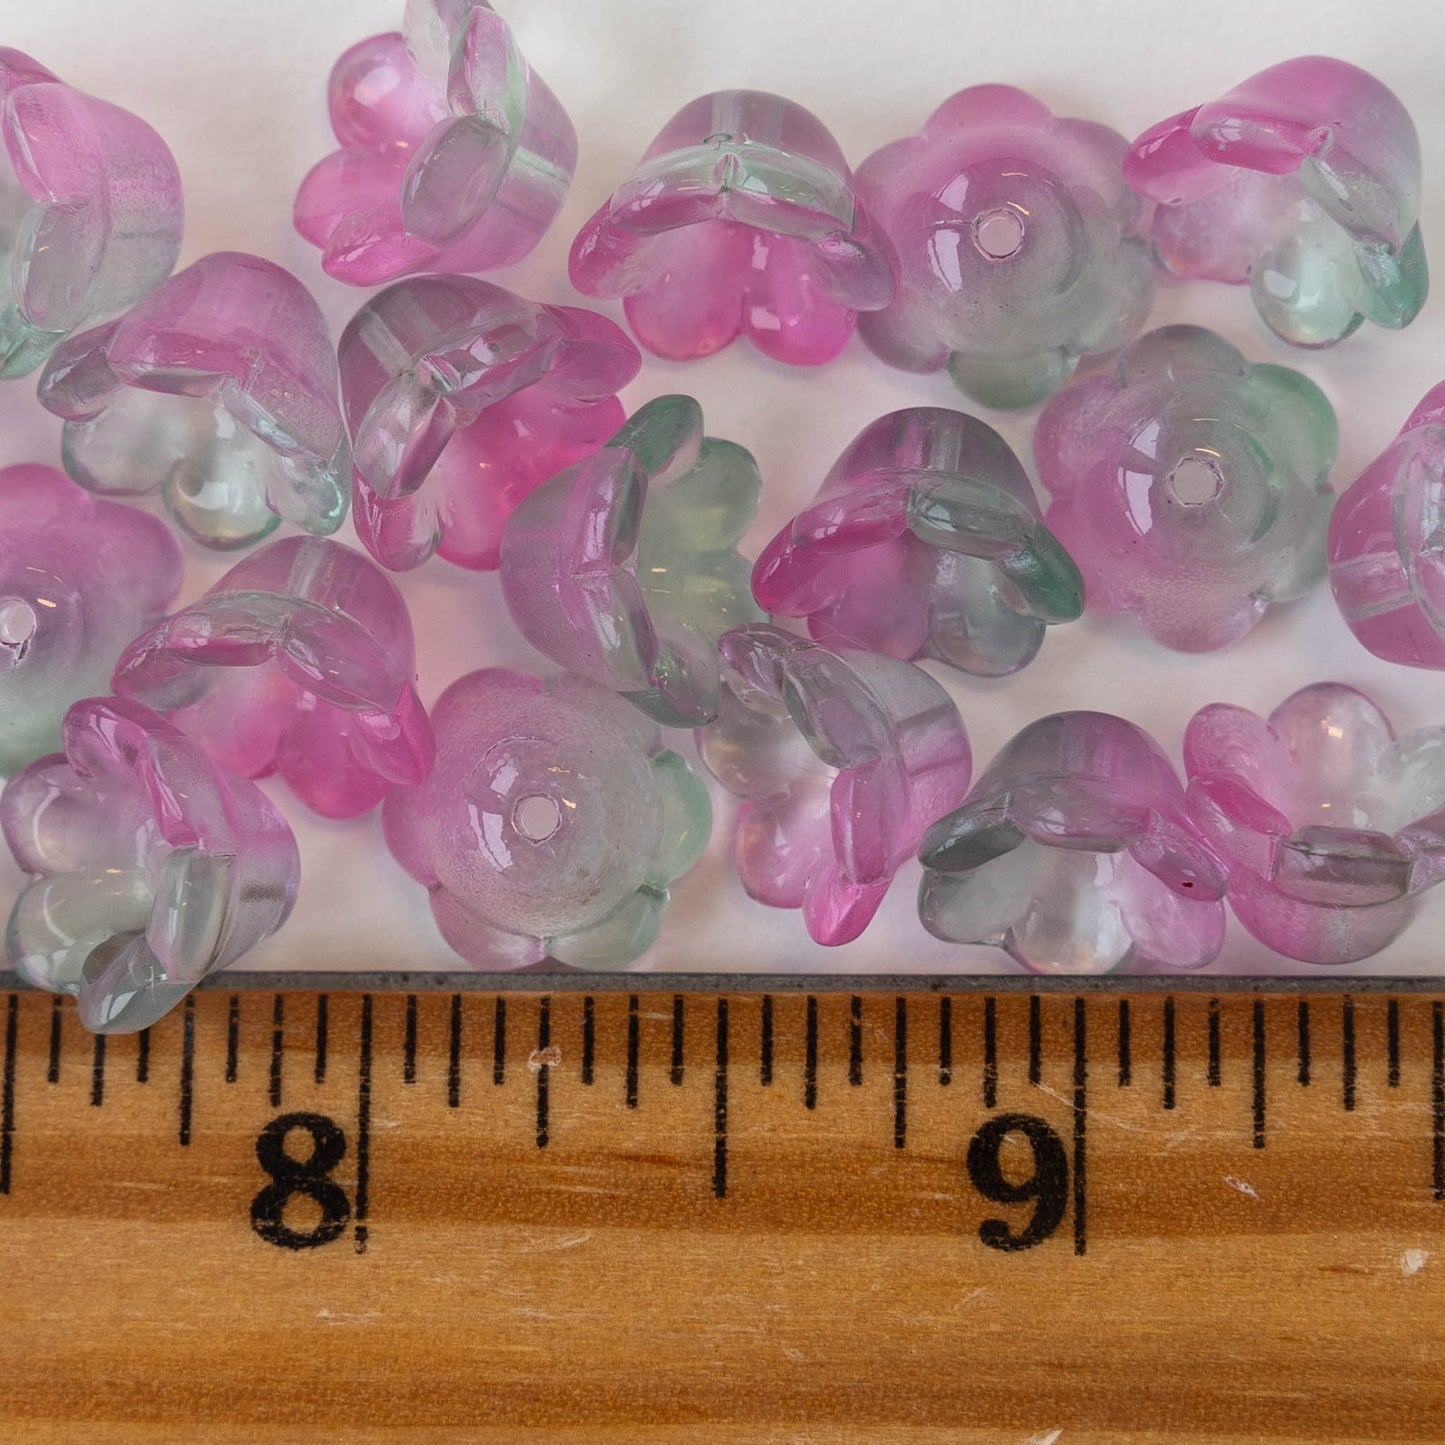 Load image into Gallery viewer, 7x12mm Flower Beads - Tourmaline Mix - 30 Beads
